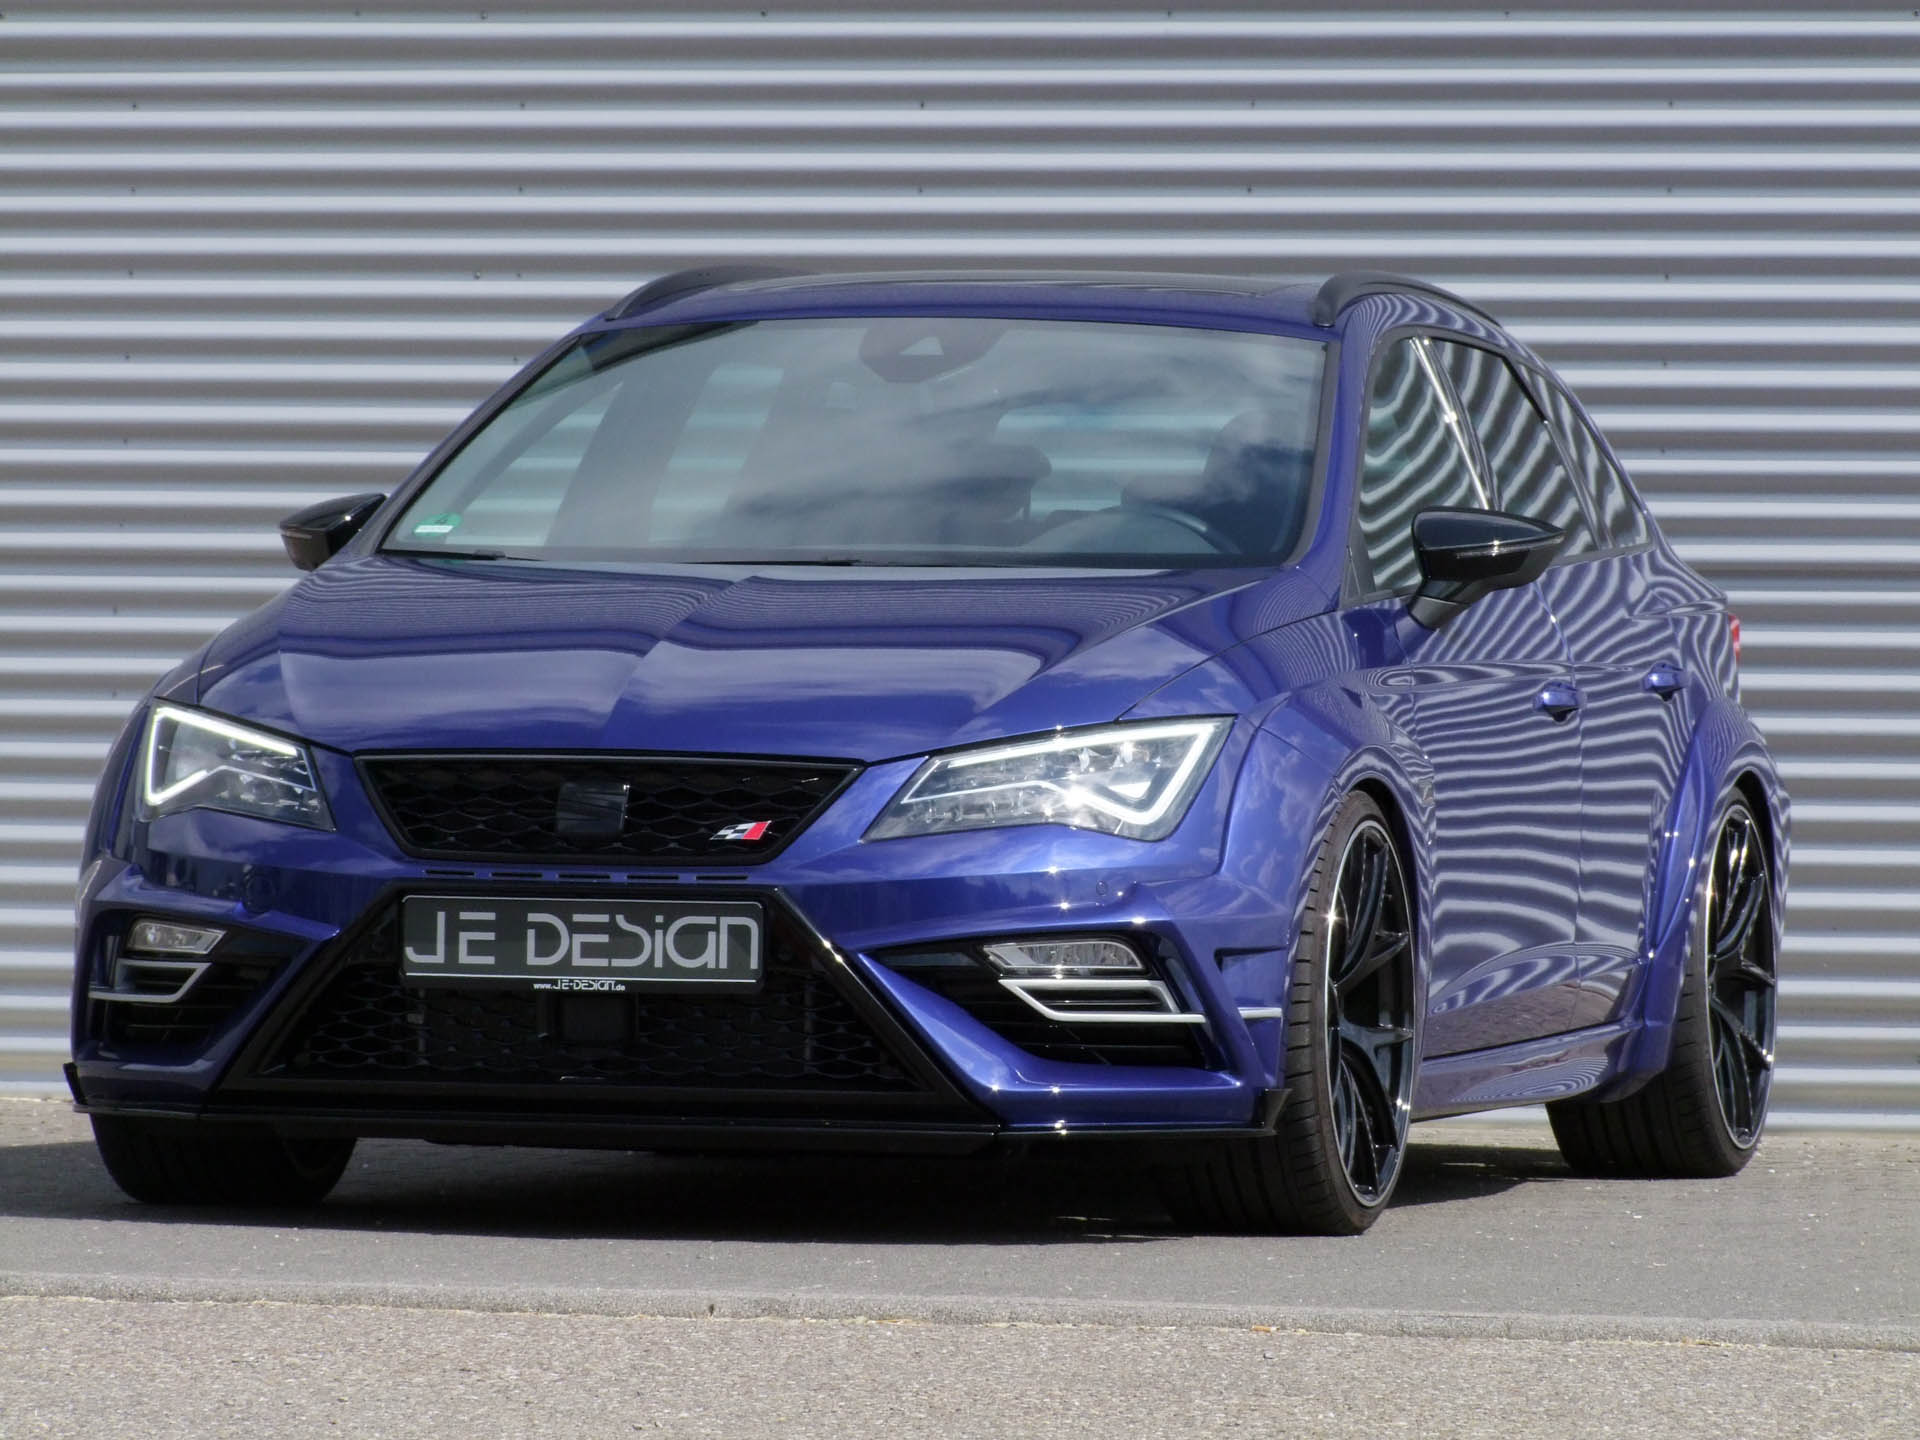 Check our price and buy JE Design body kit for Seat Leon ST FR + Cupra!